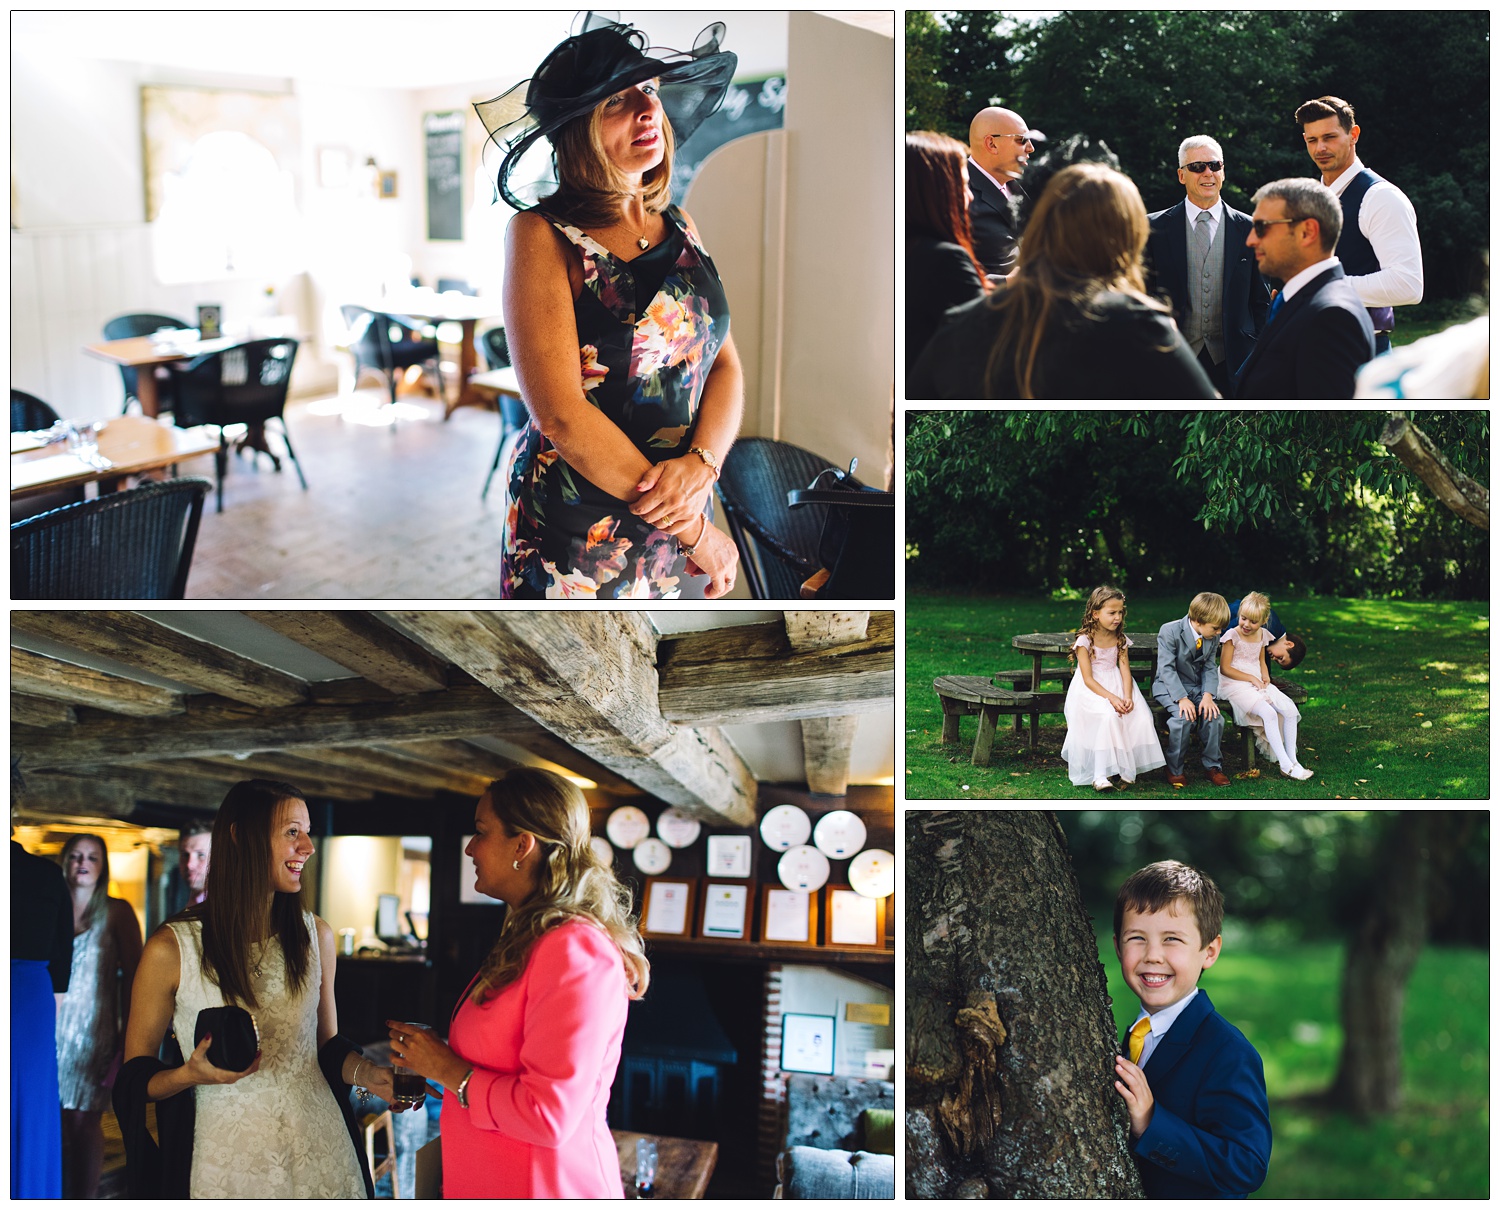 Reportage style wedding photographs at a venue in North Essex. Children are sitting outside on benches.